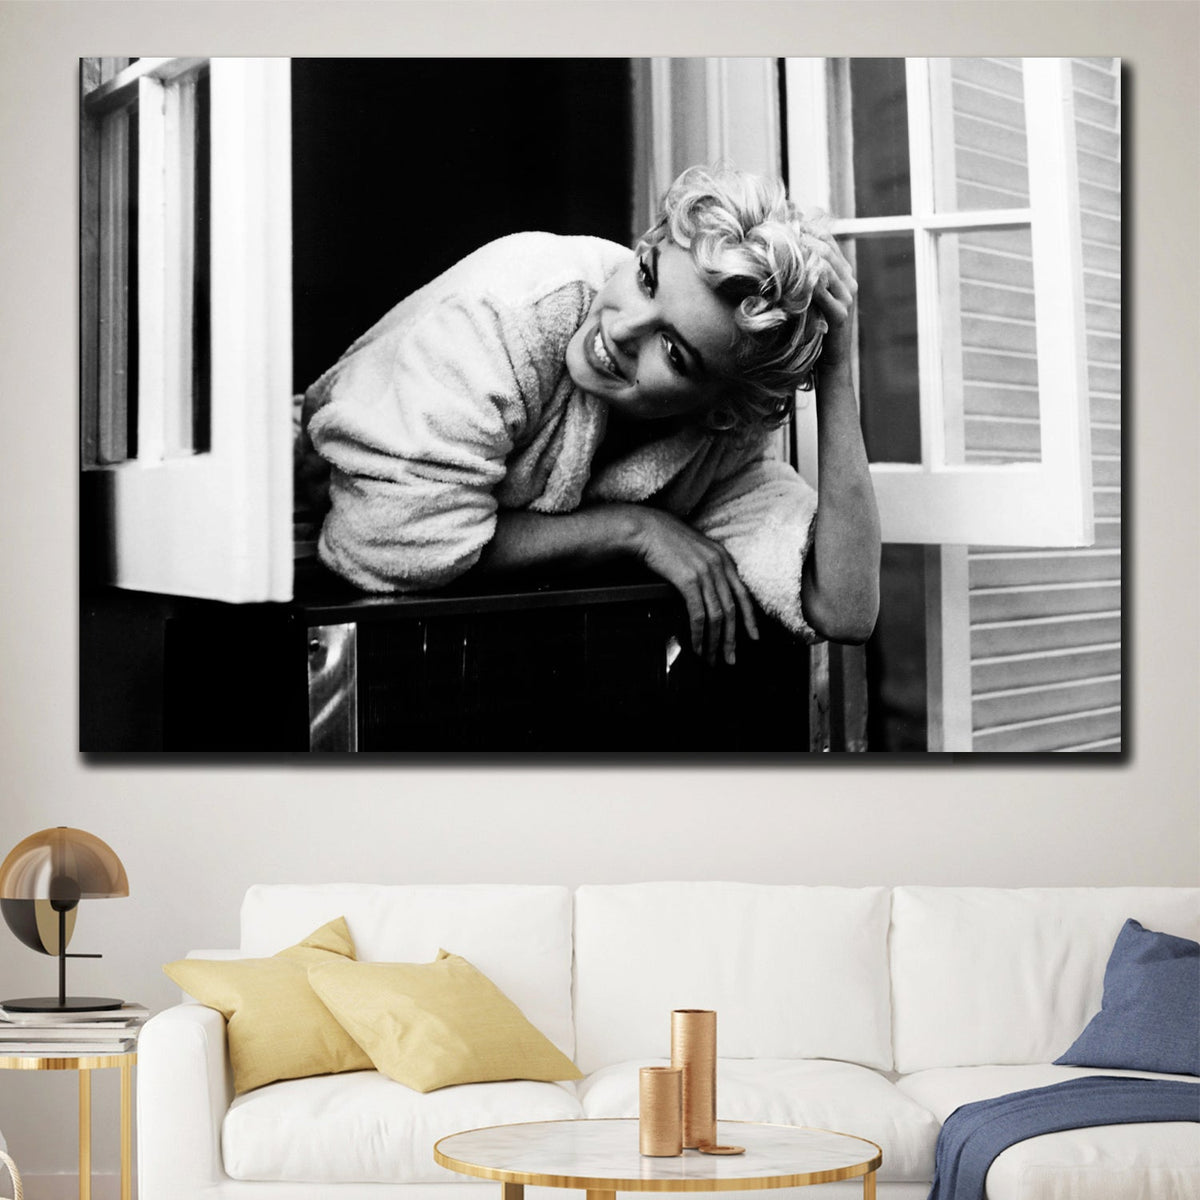 https://cdn.shopify.com/s/files/1/0387/9986/8044/products/MarilynMagicCanvasArtprintStretched-2.jpg